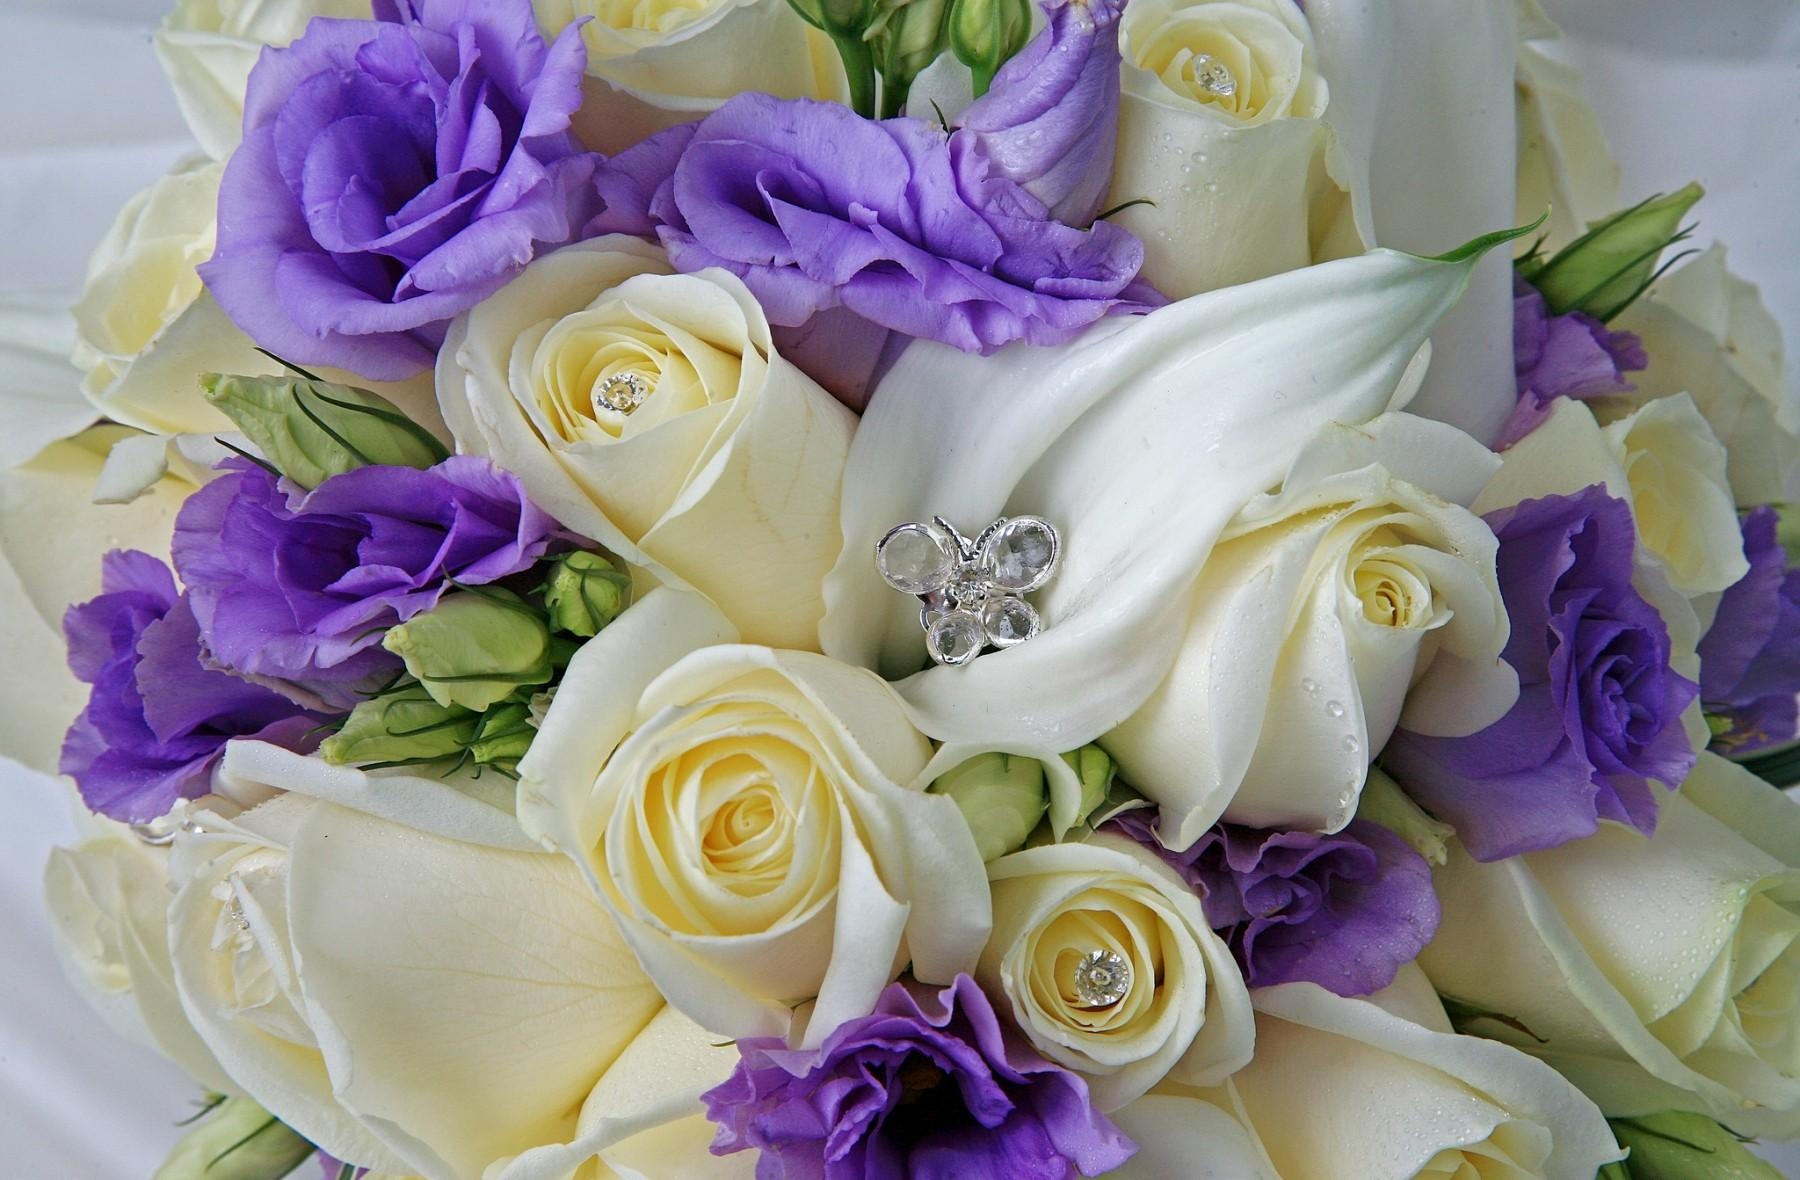 drops, roses, flowers, decorations, bouquet, lisianthus russell, lisiantus russell